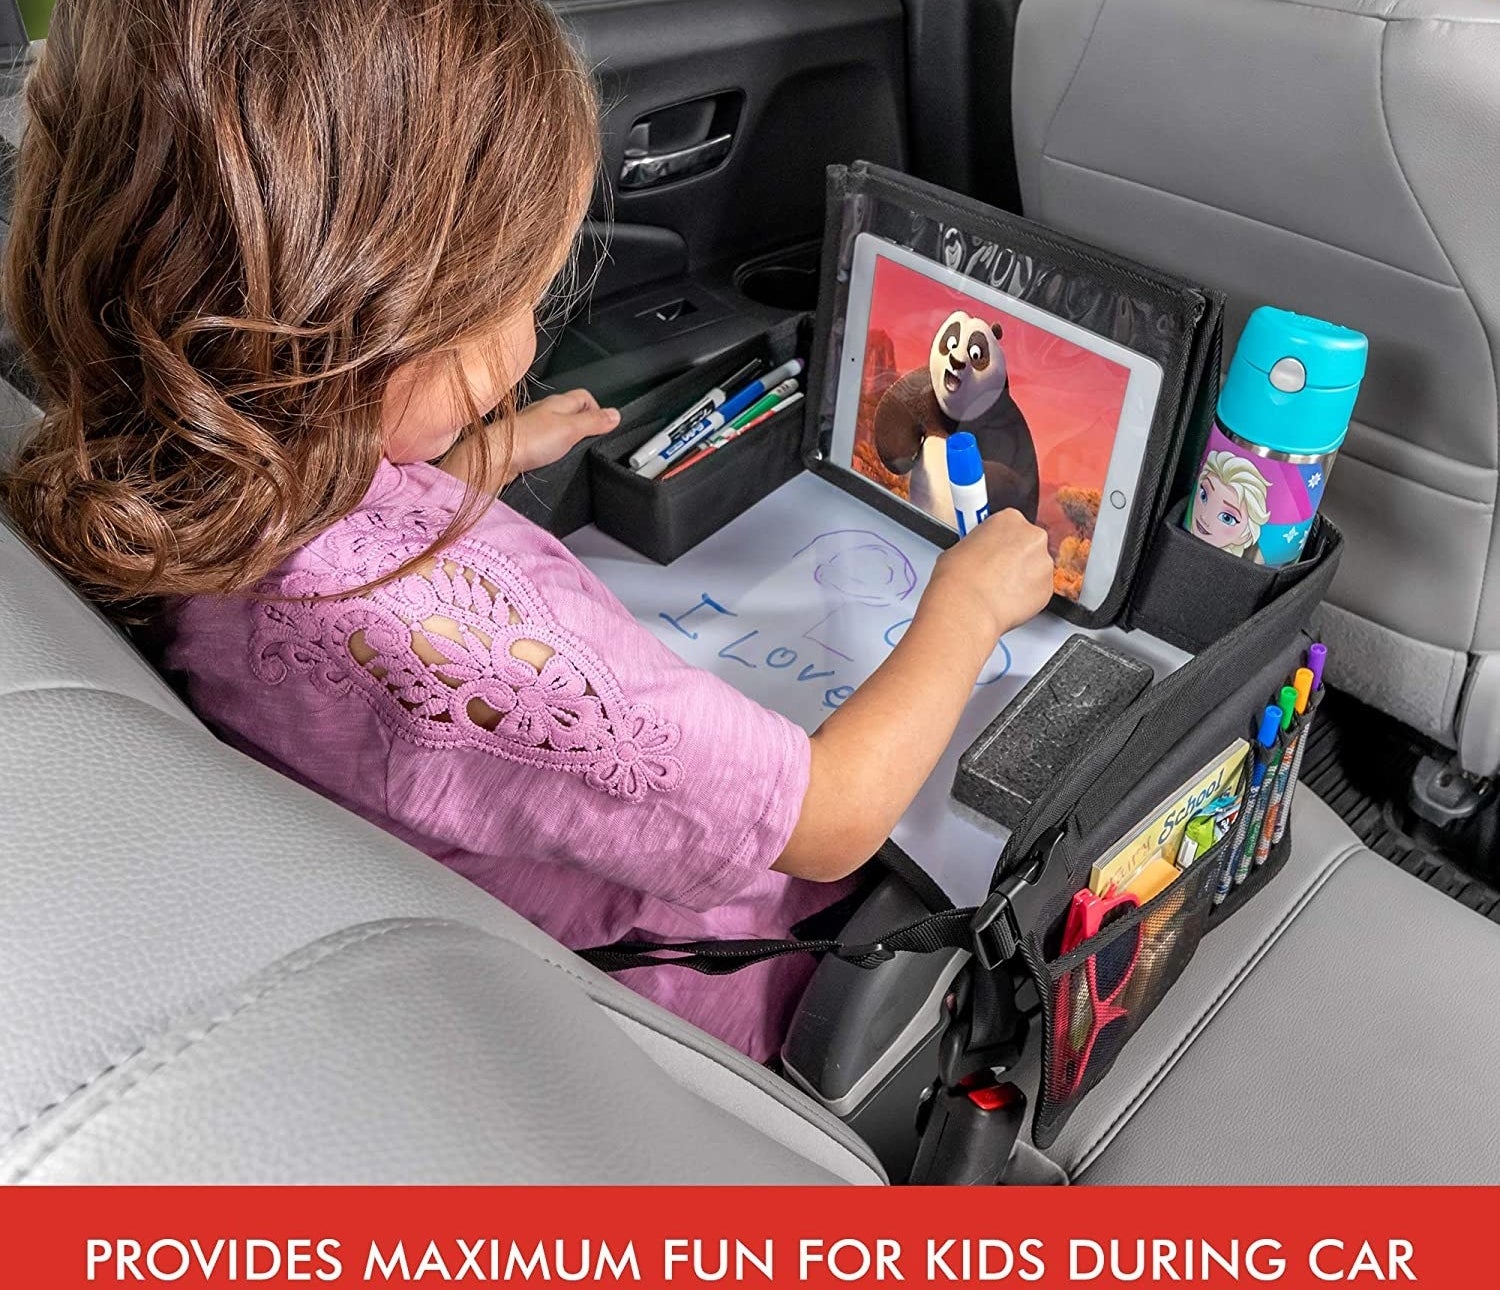 A model watching the tablet and coloring on the table in a car